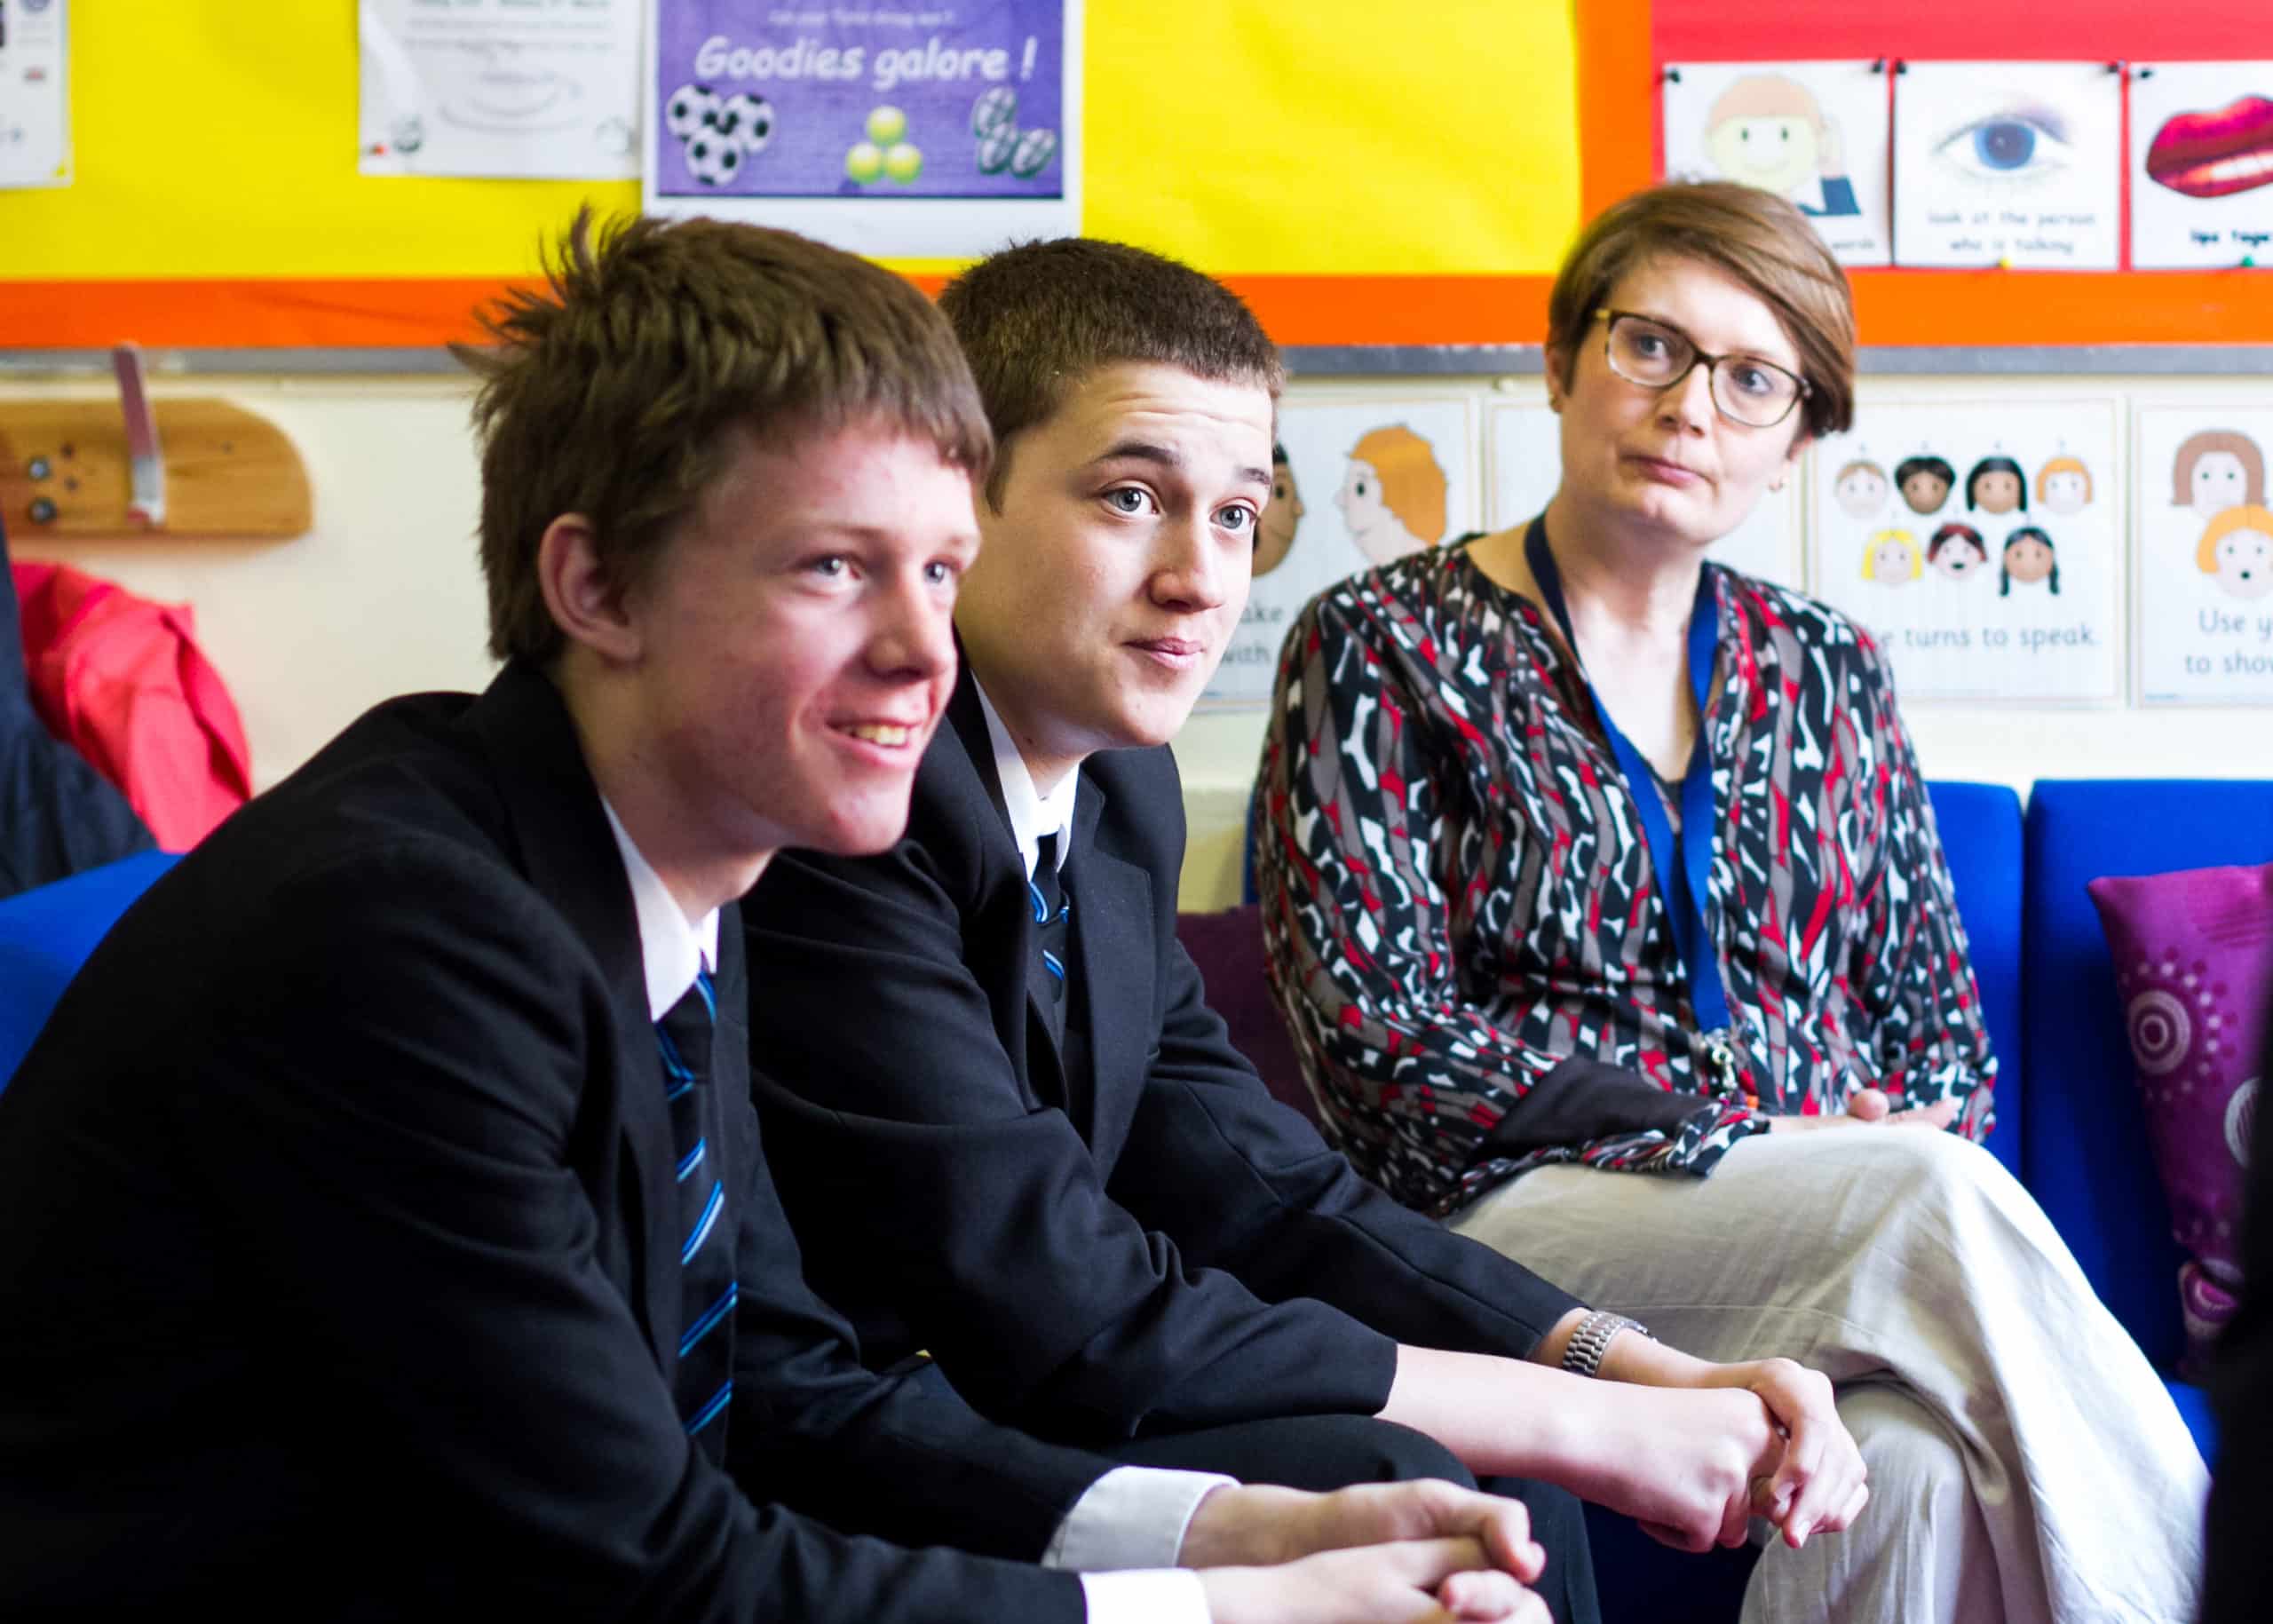 A staff member sitting next to two boys at school